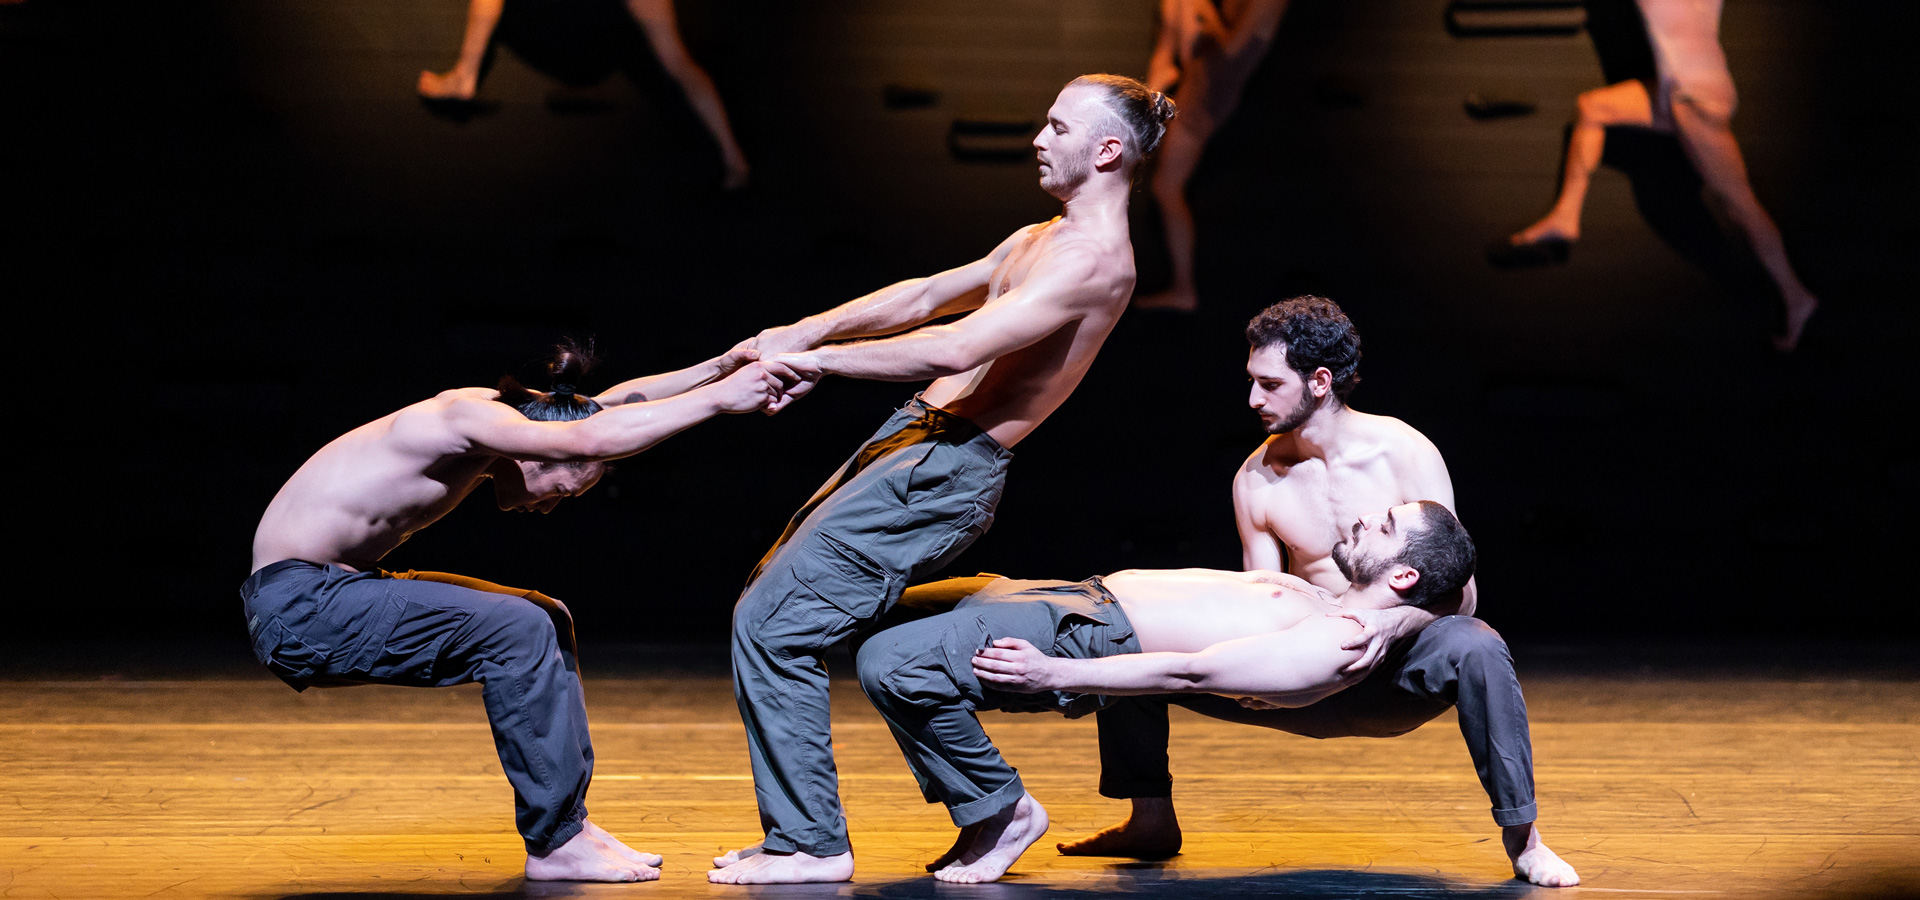 Four bare-chested male dancers in the Batsheva Dance group balance upon one another in an on-stage performance of MOMO.